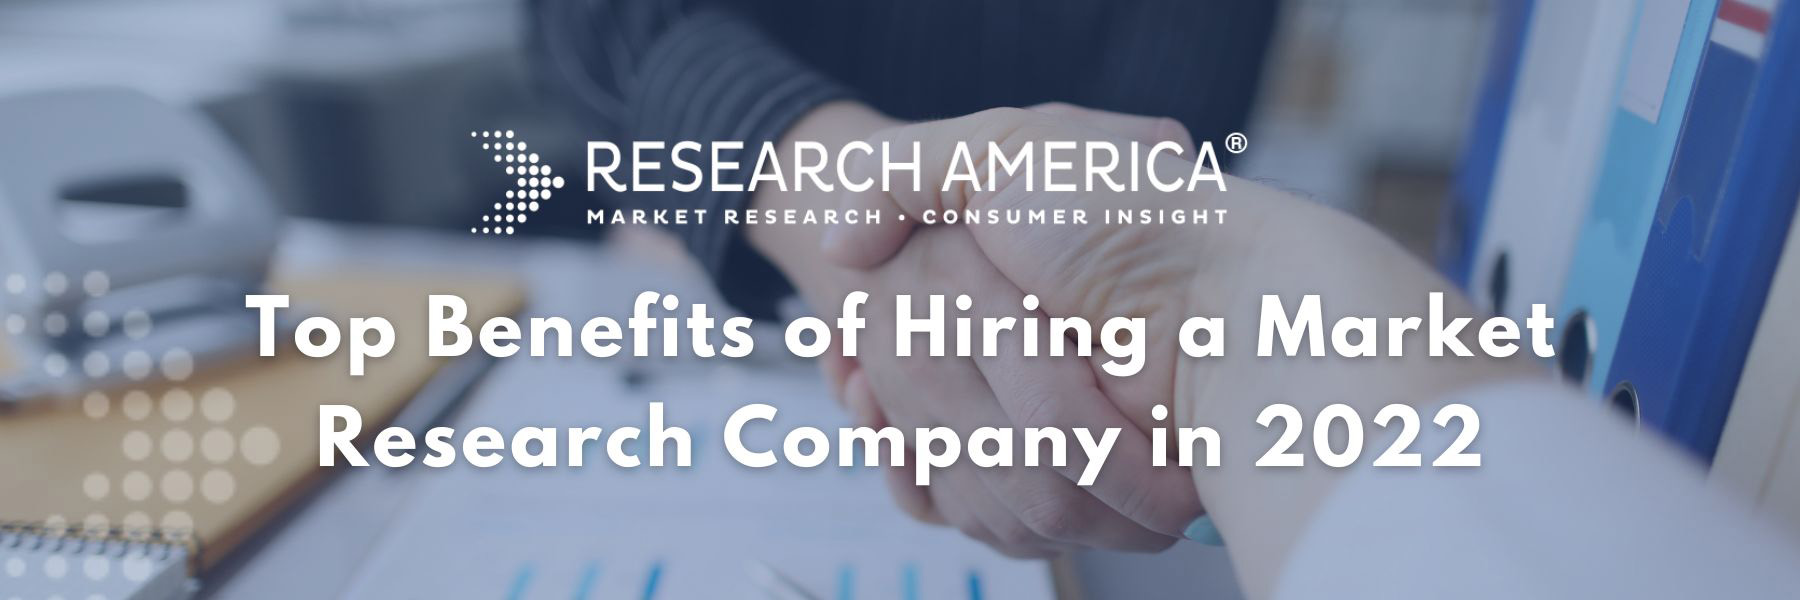 Top Benefits of Hiring a Market Research Company in 2022